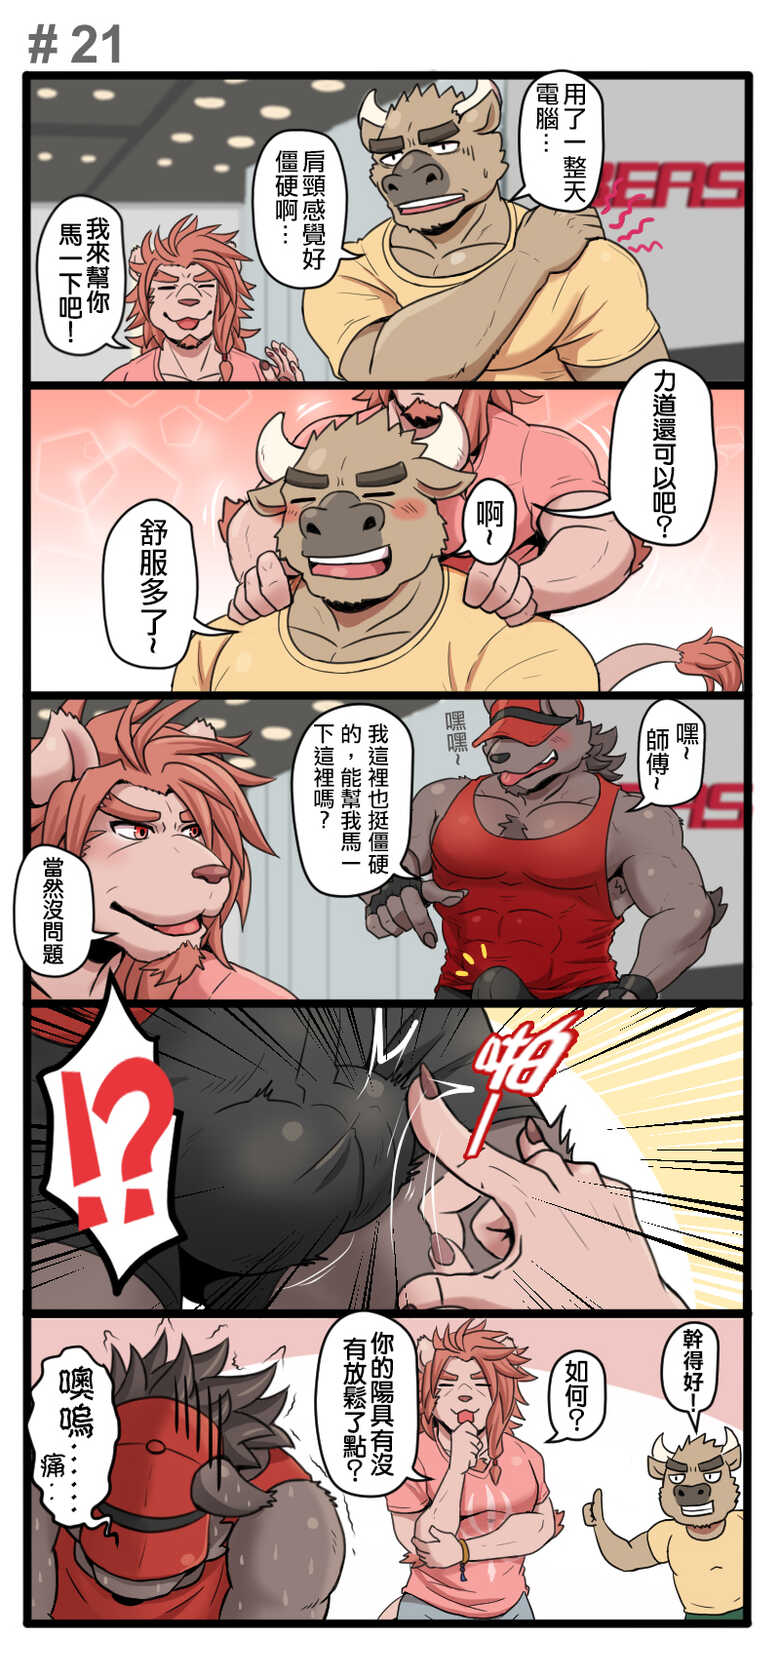 [Ripple Moon] Gym Pals (健身小哥) (Ongoing) [Chinese] [连载中] - Page 22